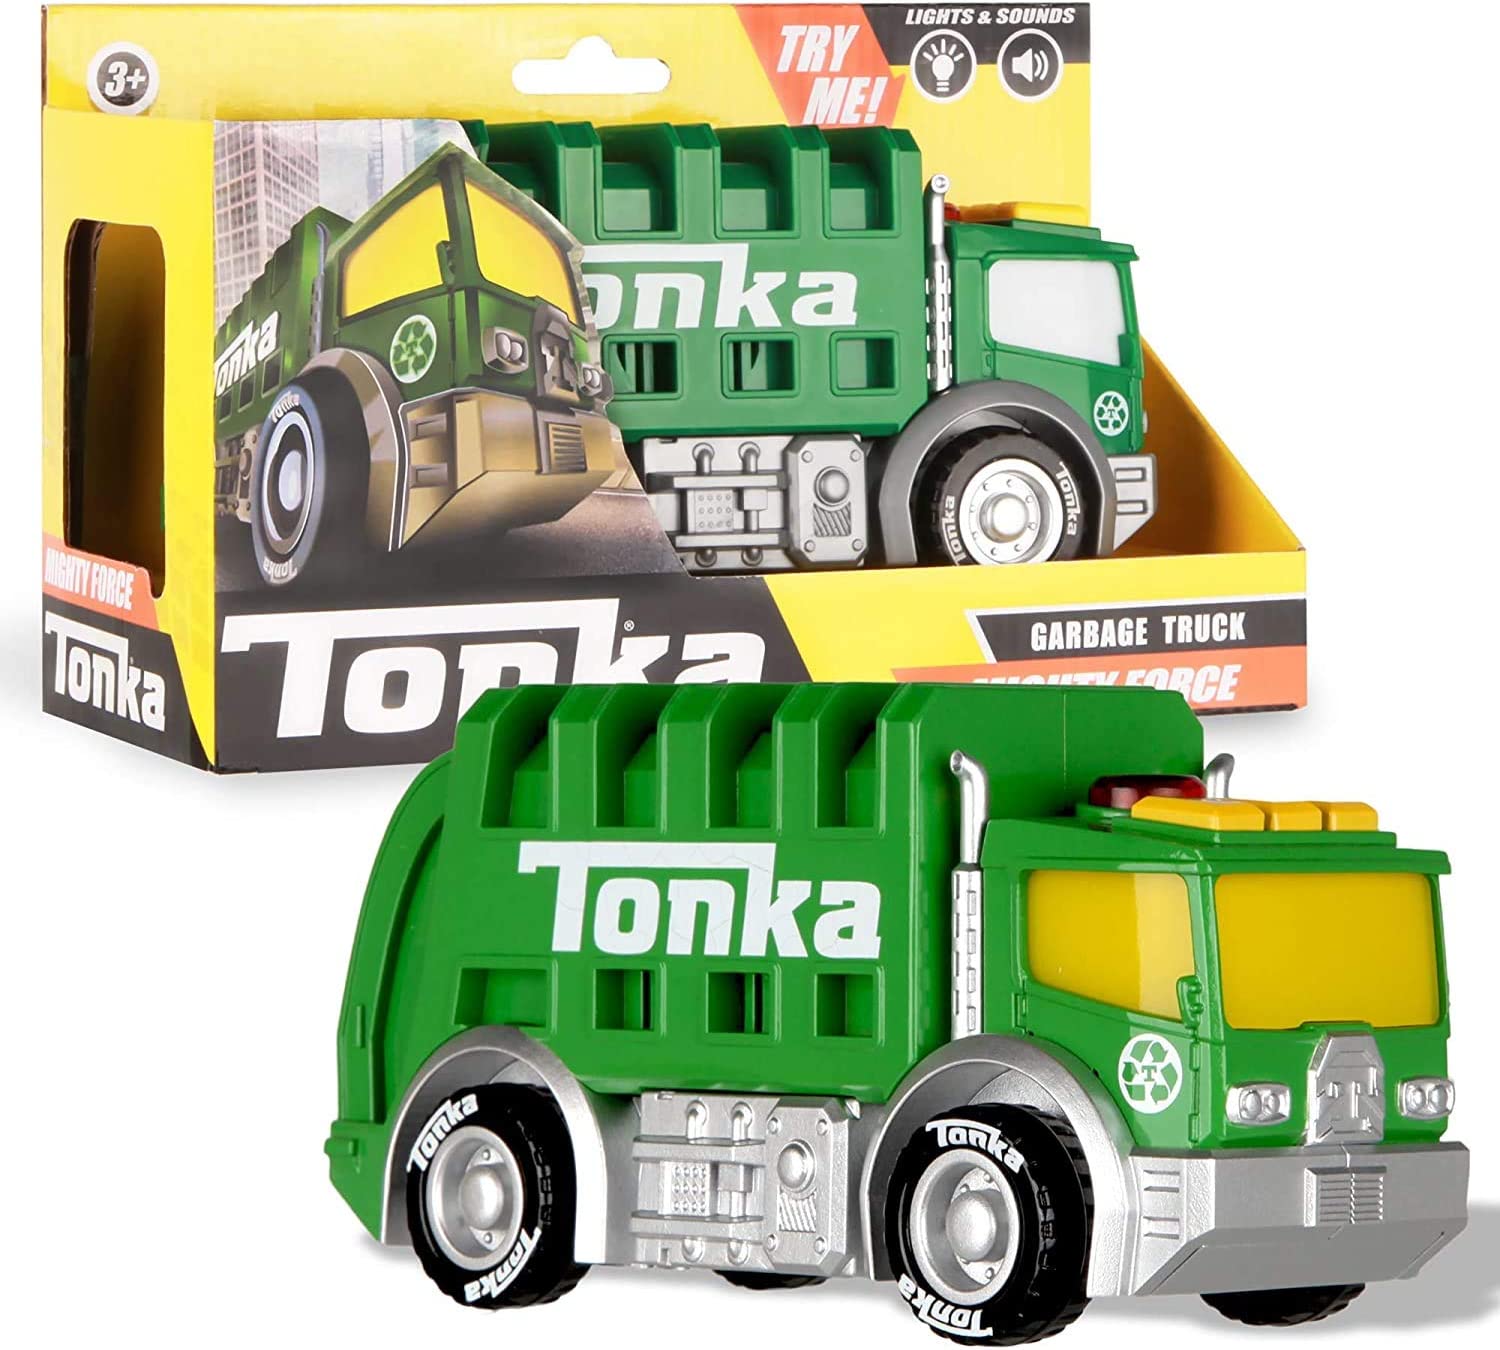 Tonka Mighty Truck Assortment by Schylling